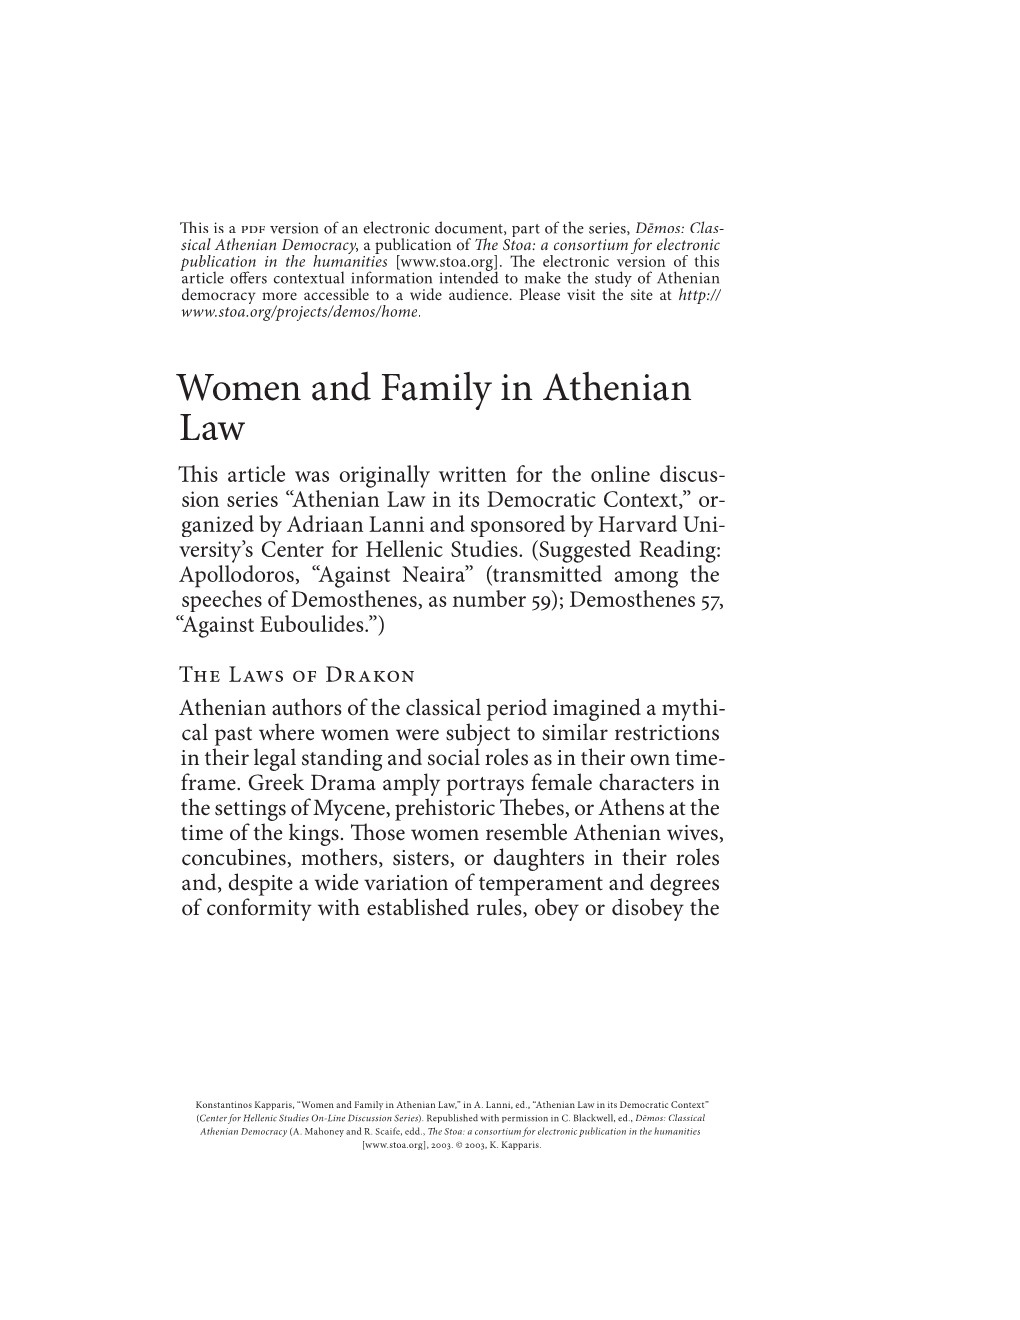 Women and Family in Athenian